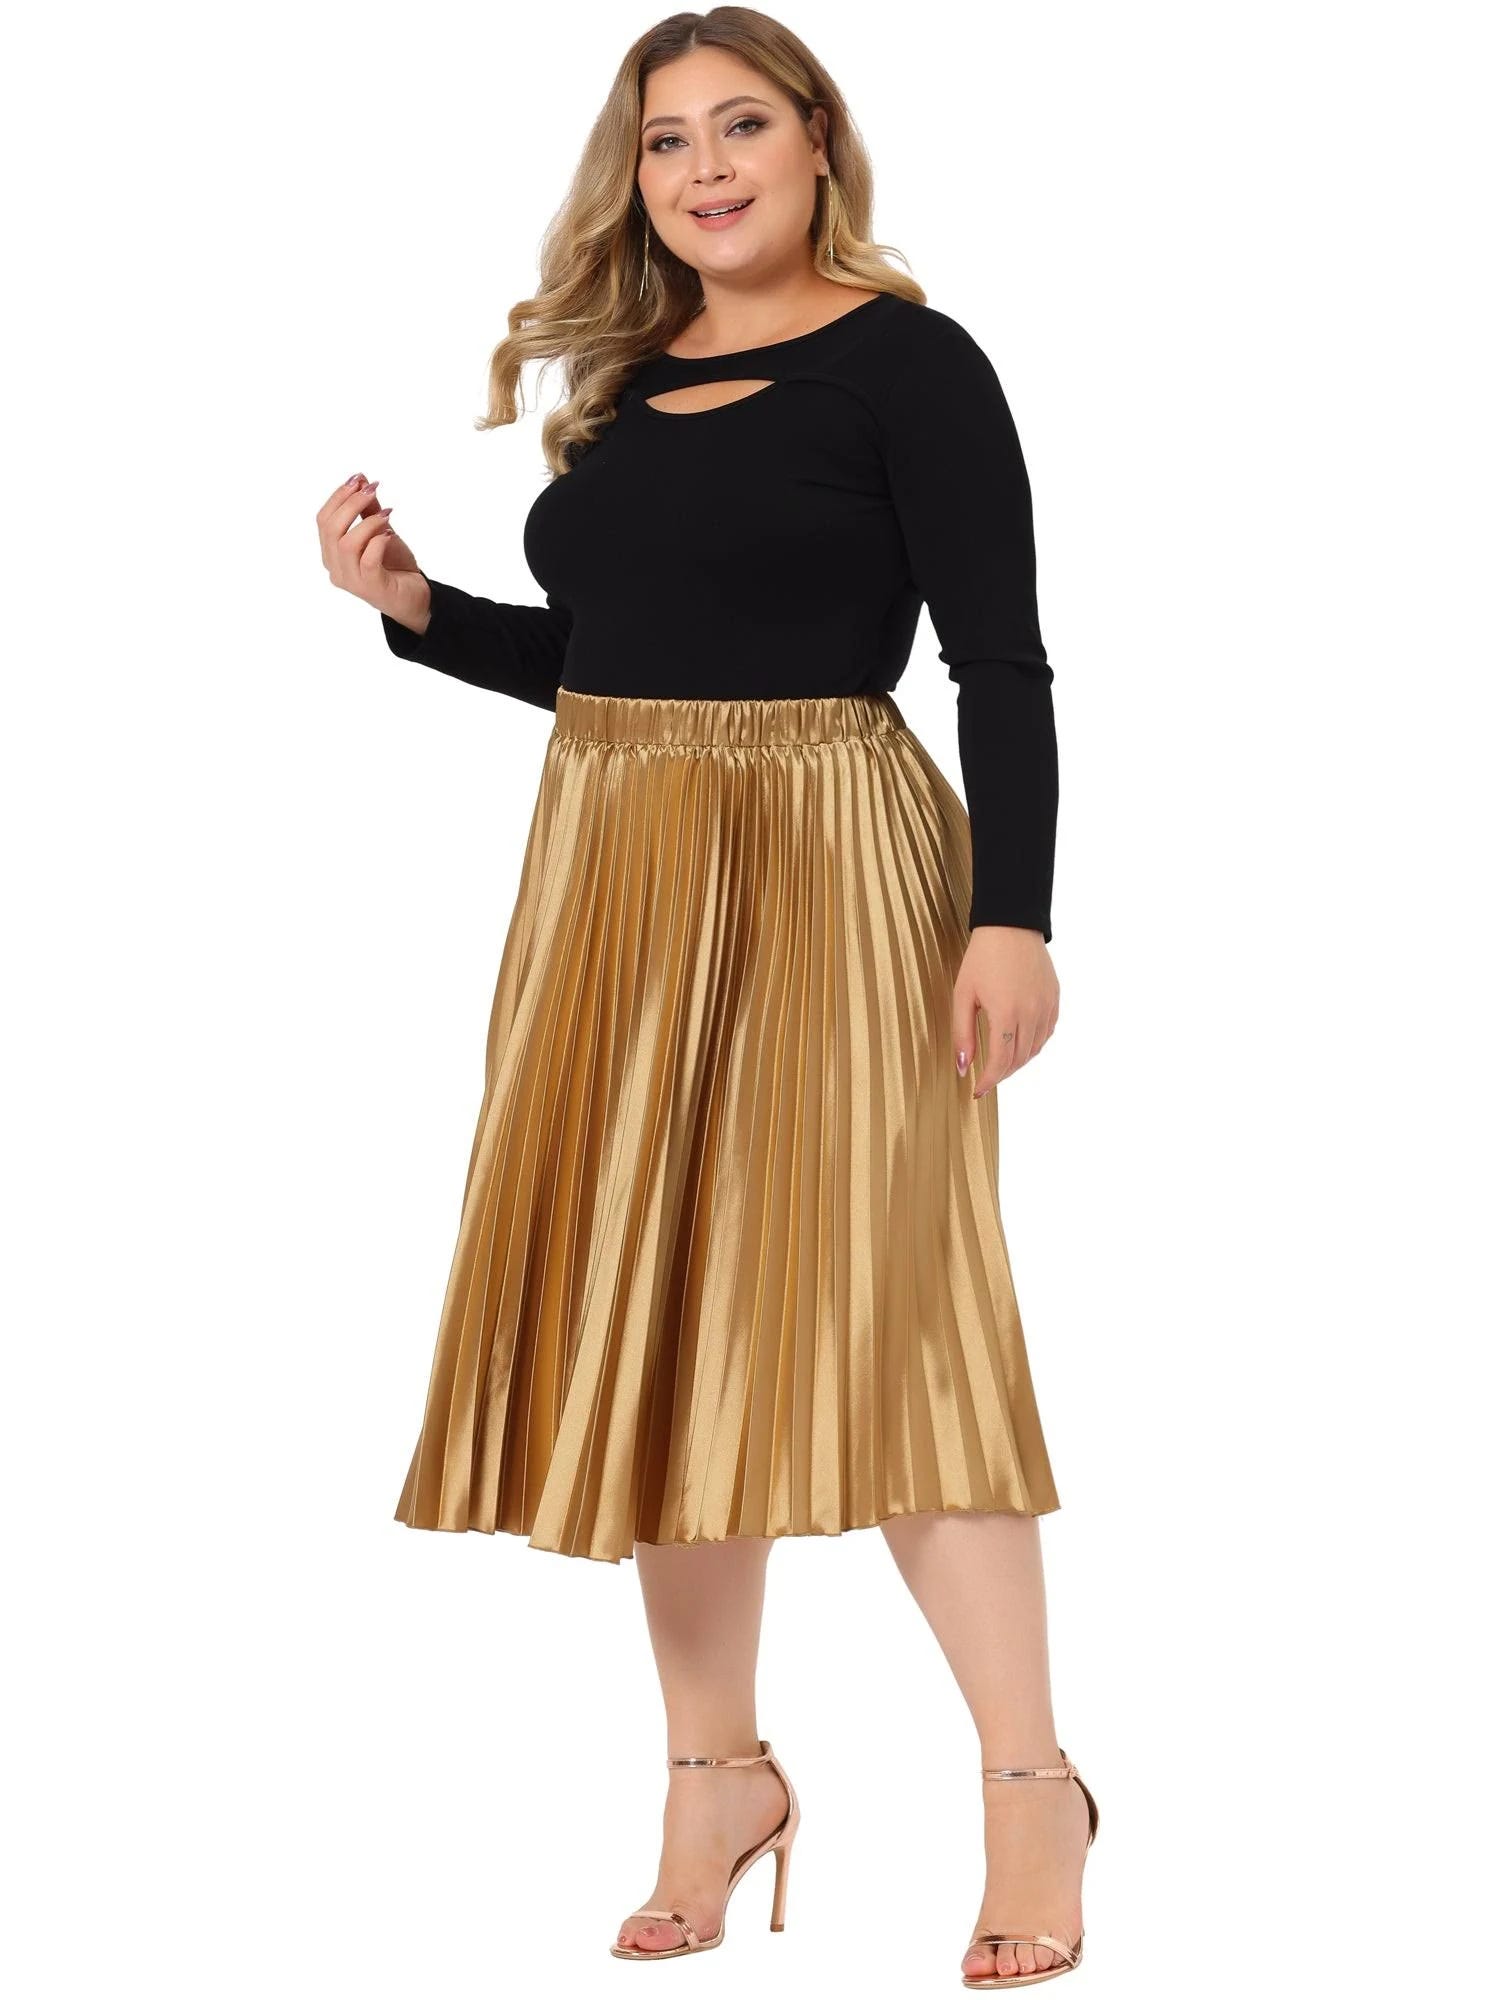 Gold Metallic Plus Size A-Line Skirt for Halloween | Image